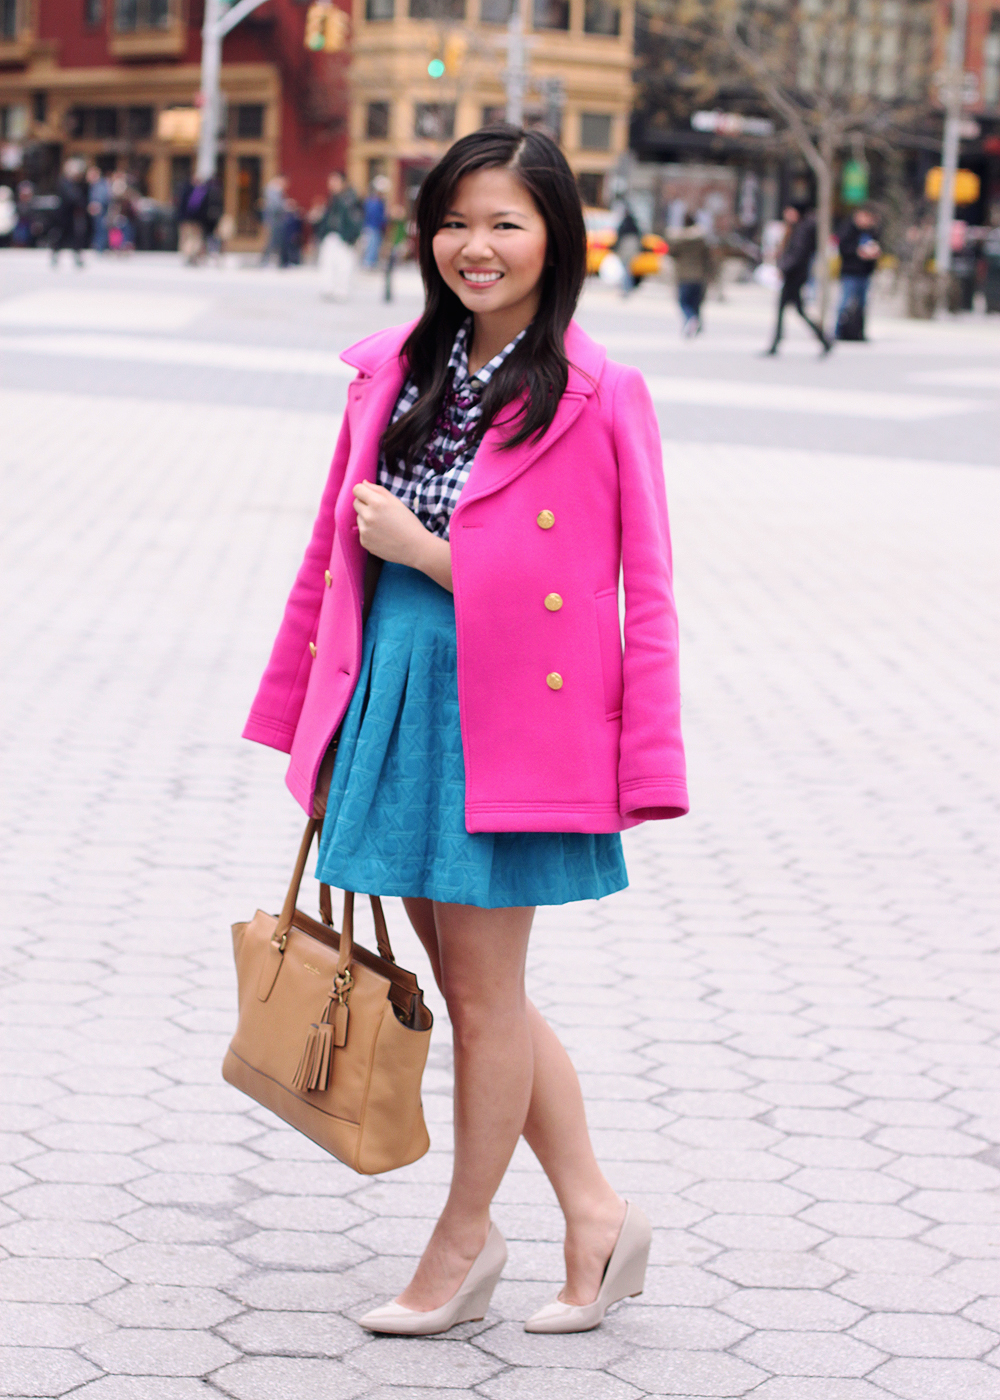 Skirt The Rules; NYC fashion blogger; style blog; how to transition from winter to spring; J.Crew hot pink majesty stadium cloth coat; J.Crew Factory navy gingham button up shirt; Kirna Zabete for Target turquoise jacquard skirt; Coach Candace carryall tote in camel; New York & Co. purple stone necklace; C. Wonder snake skinny cuff; Pour La Victoire Mai wedge